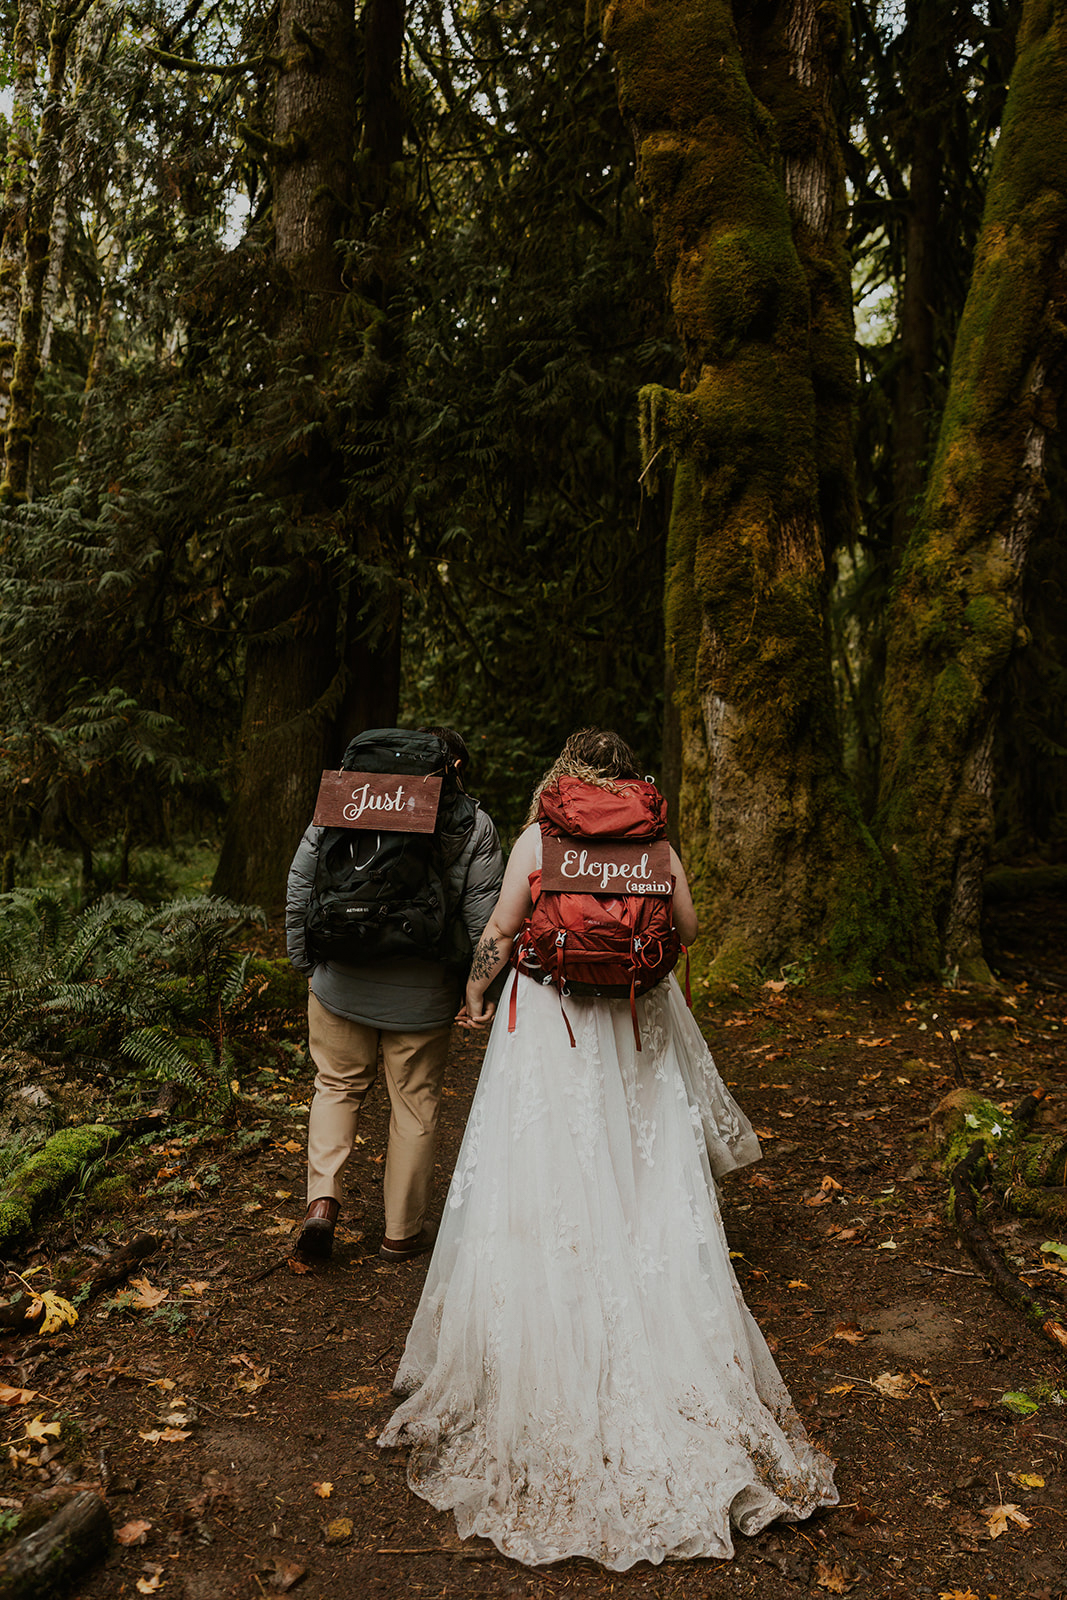 Olympic National Park elopement, backpacks with "just eloped" signs